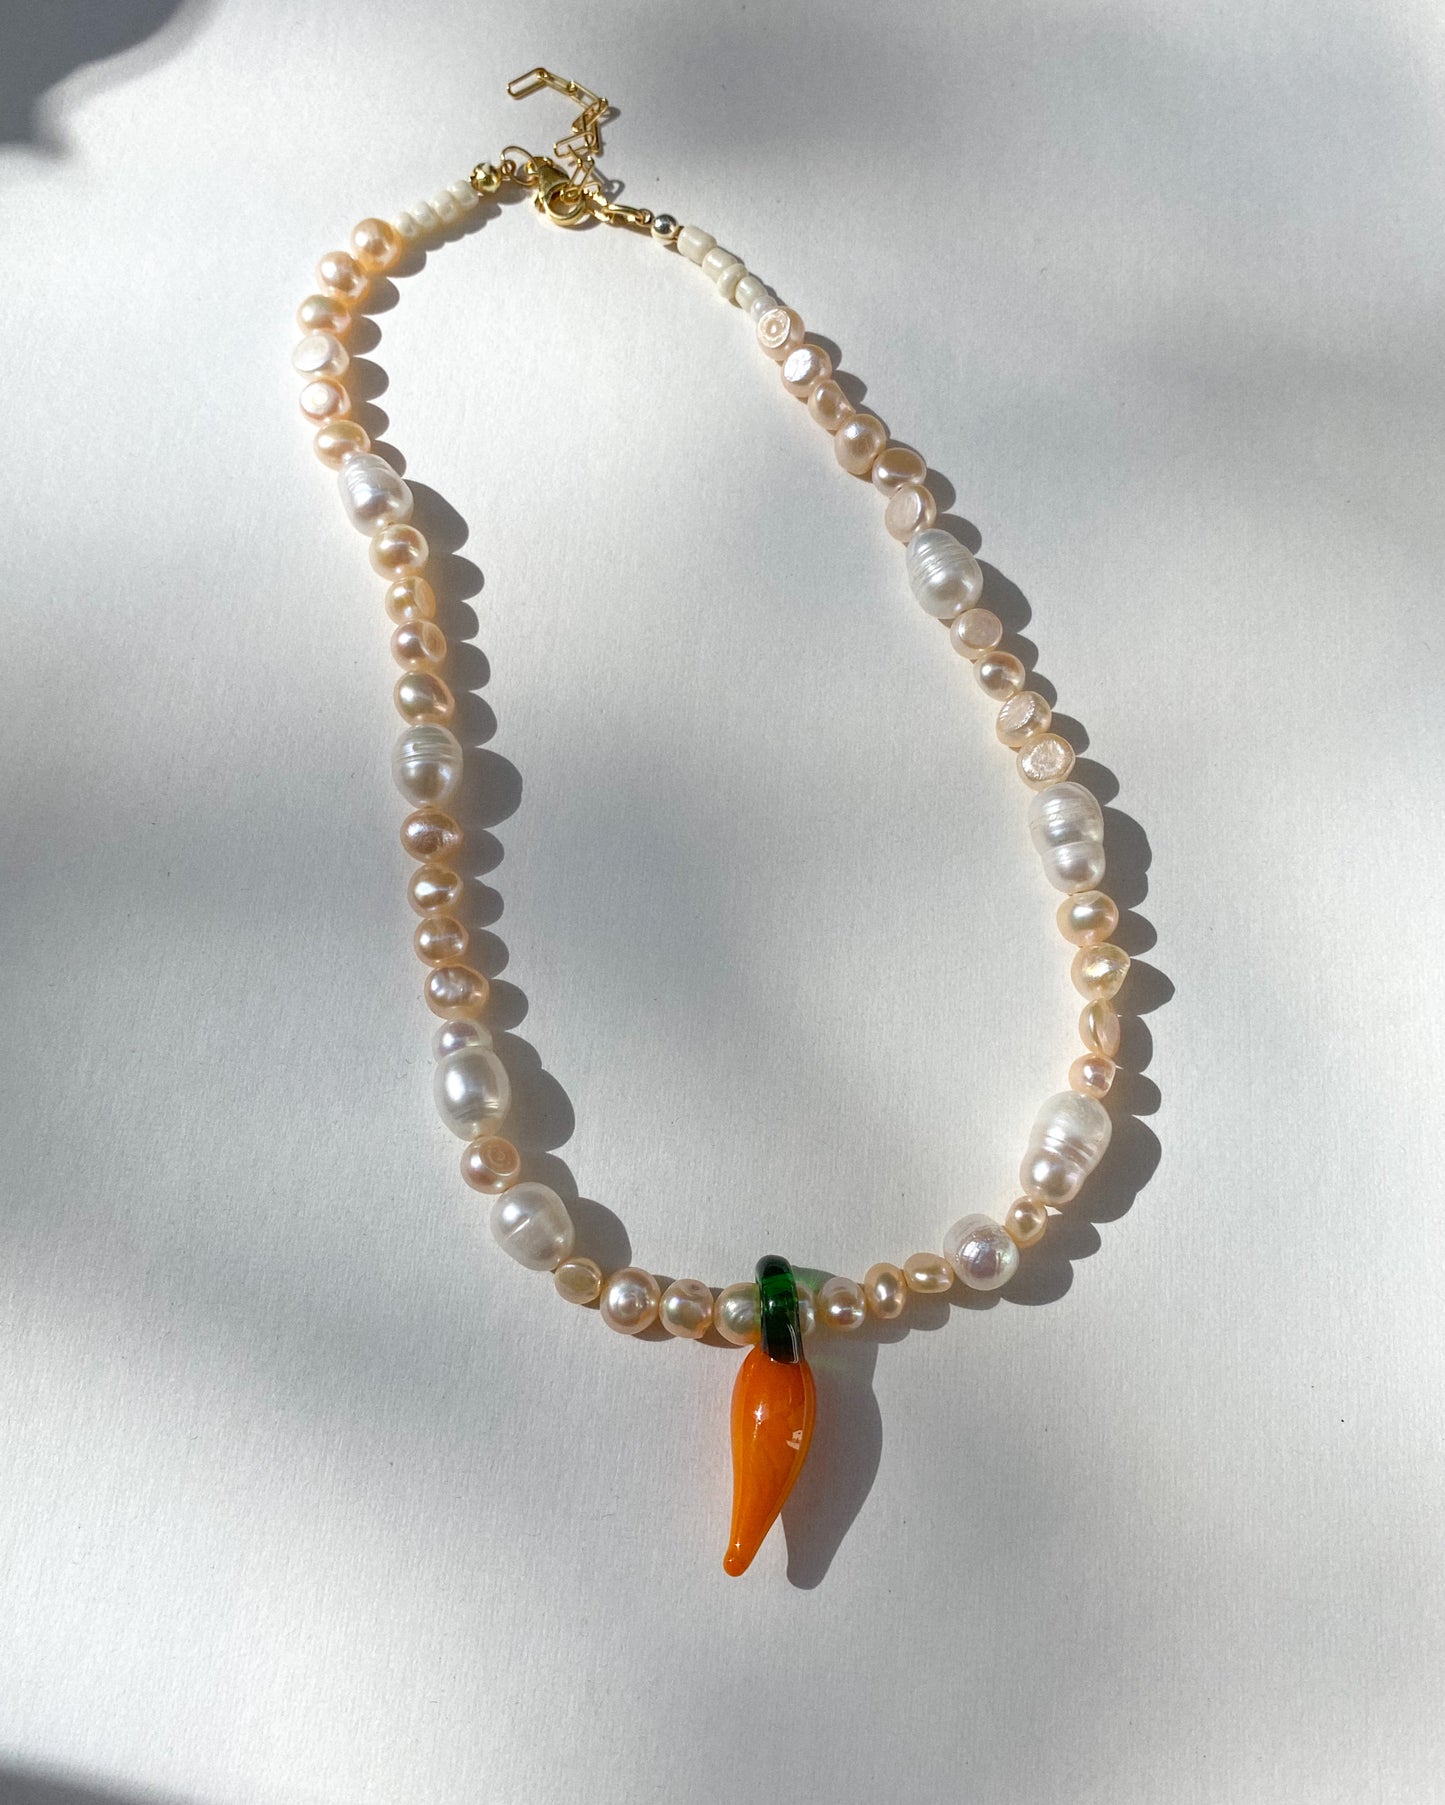 The carrot pearl necklace